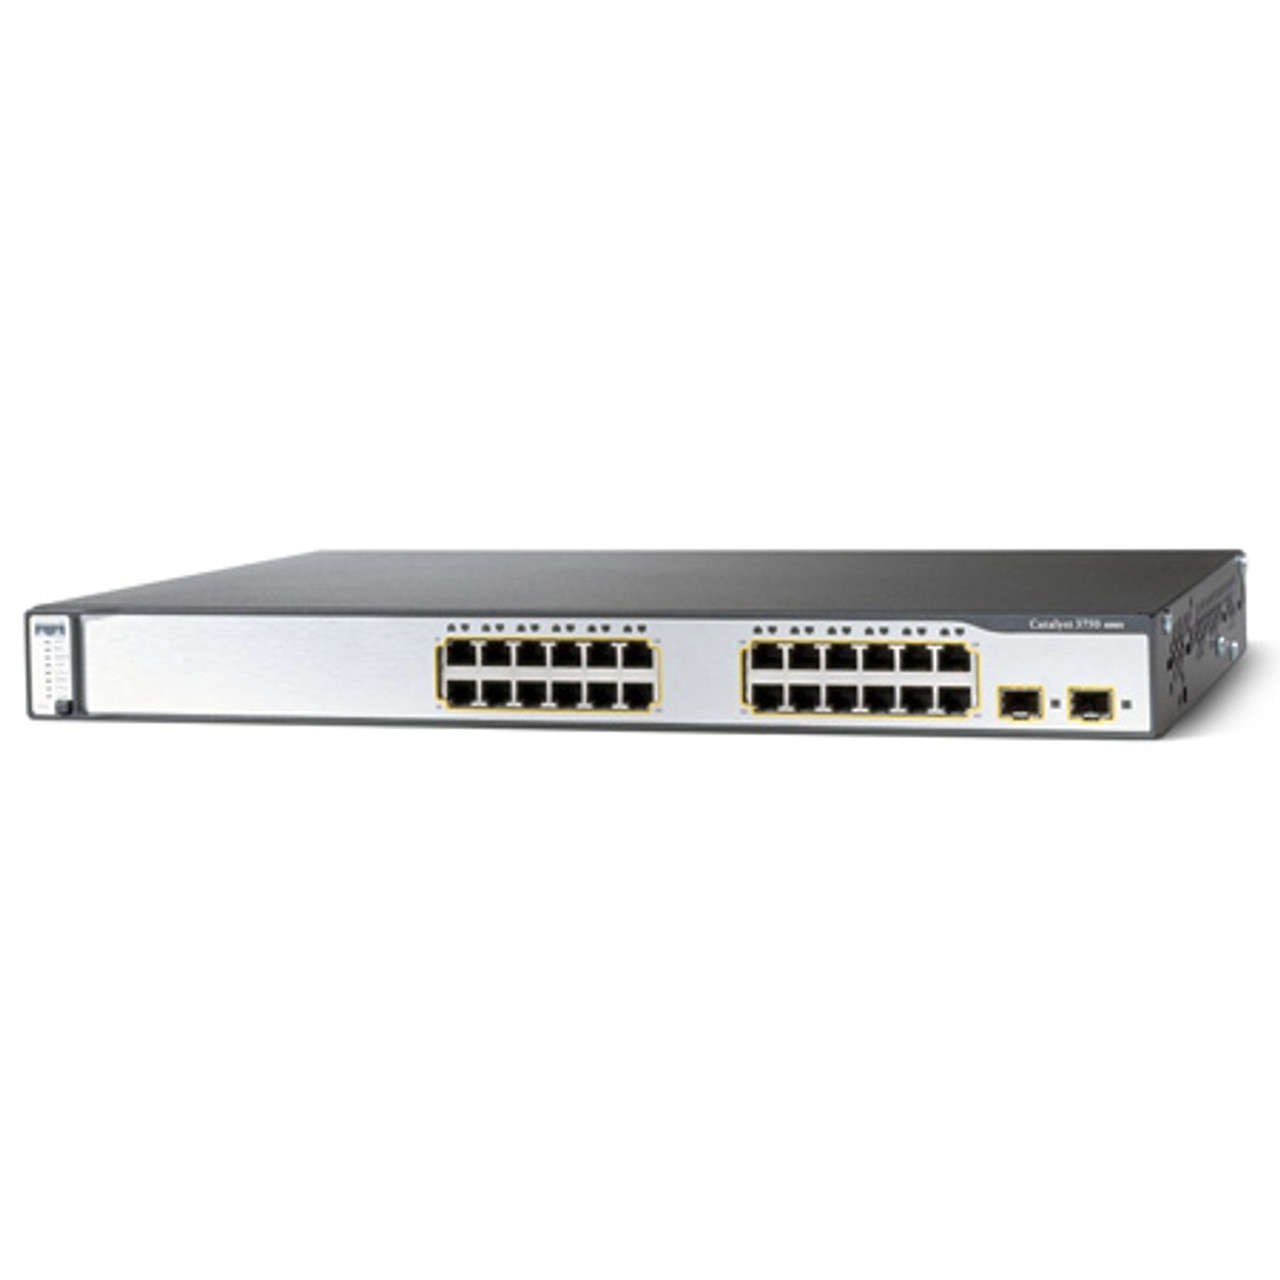 Cisco Catalyst 3750-24PS SMI Switch 24 Ports Managed Rack Mountable